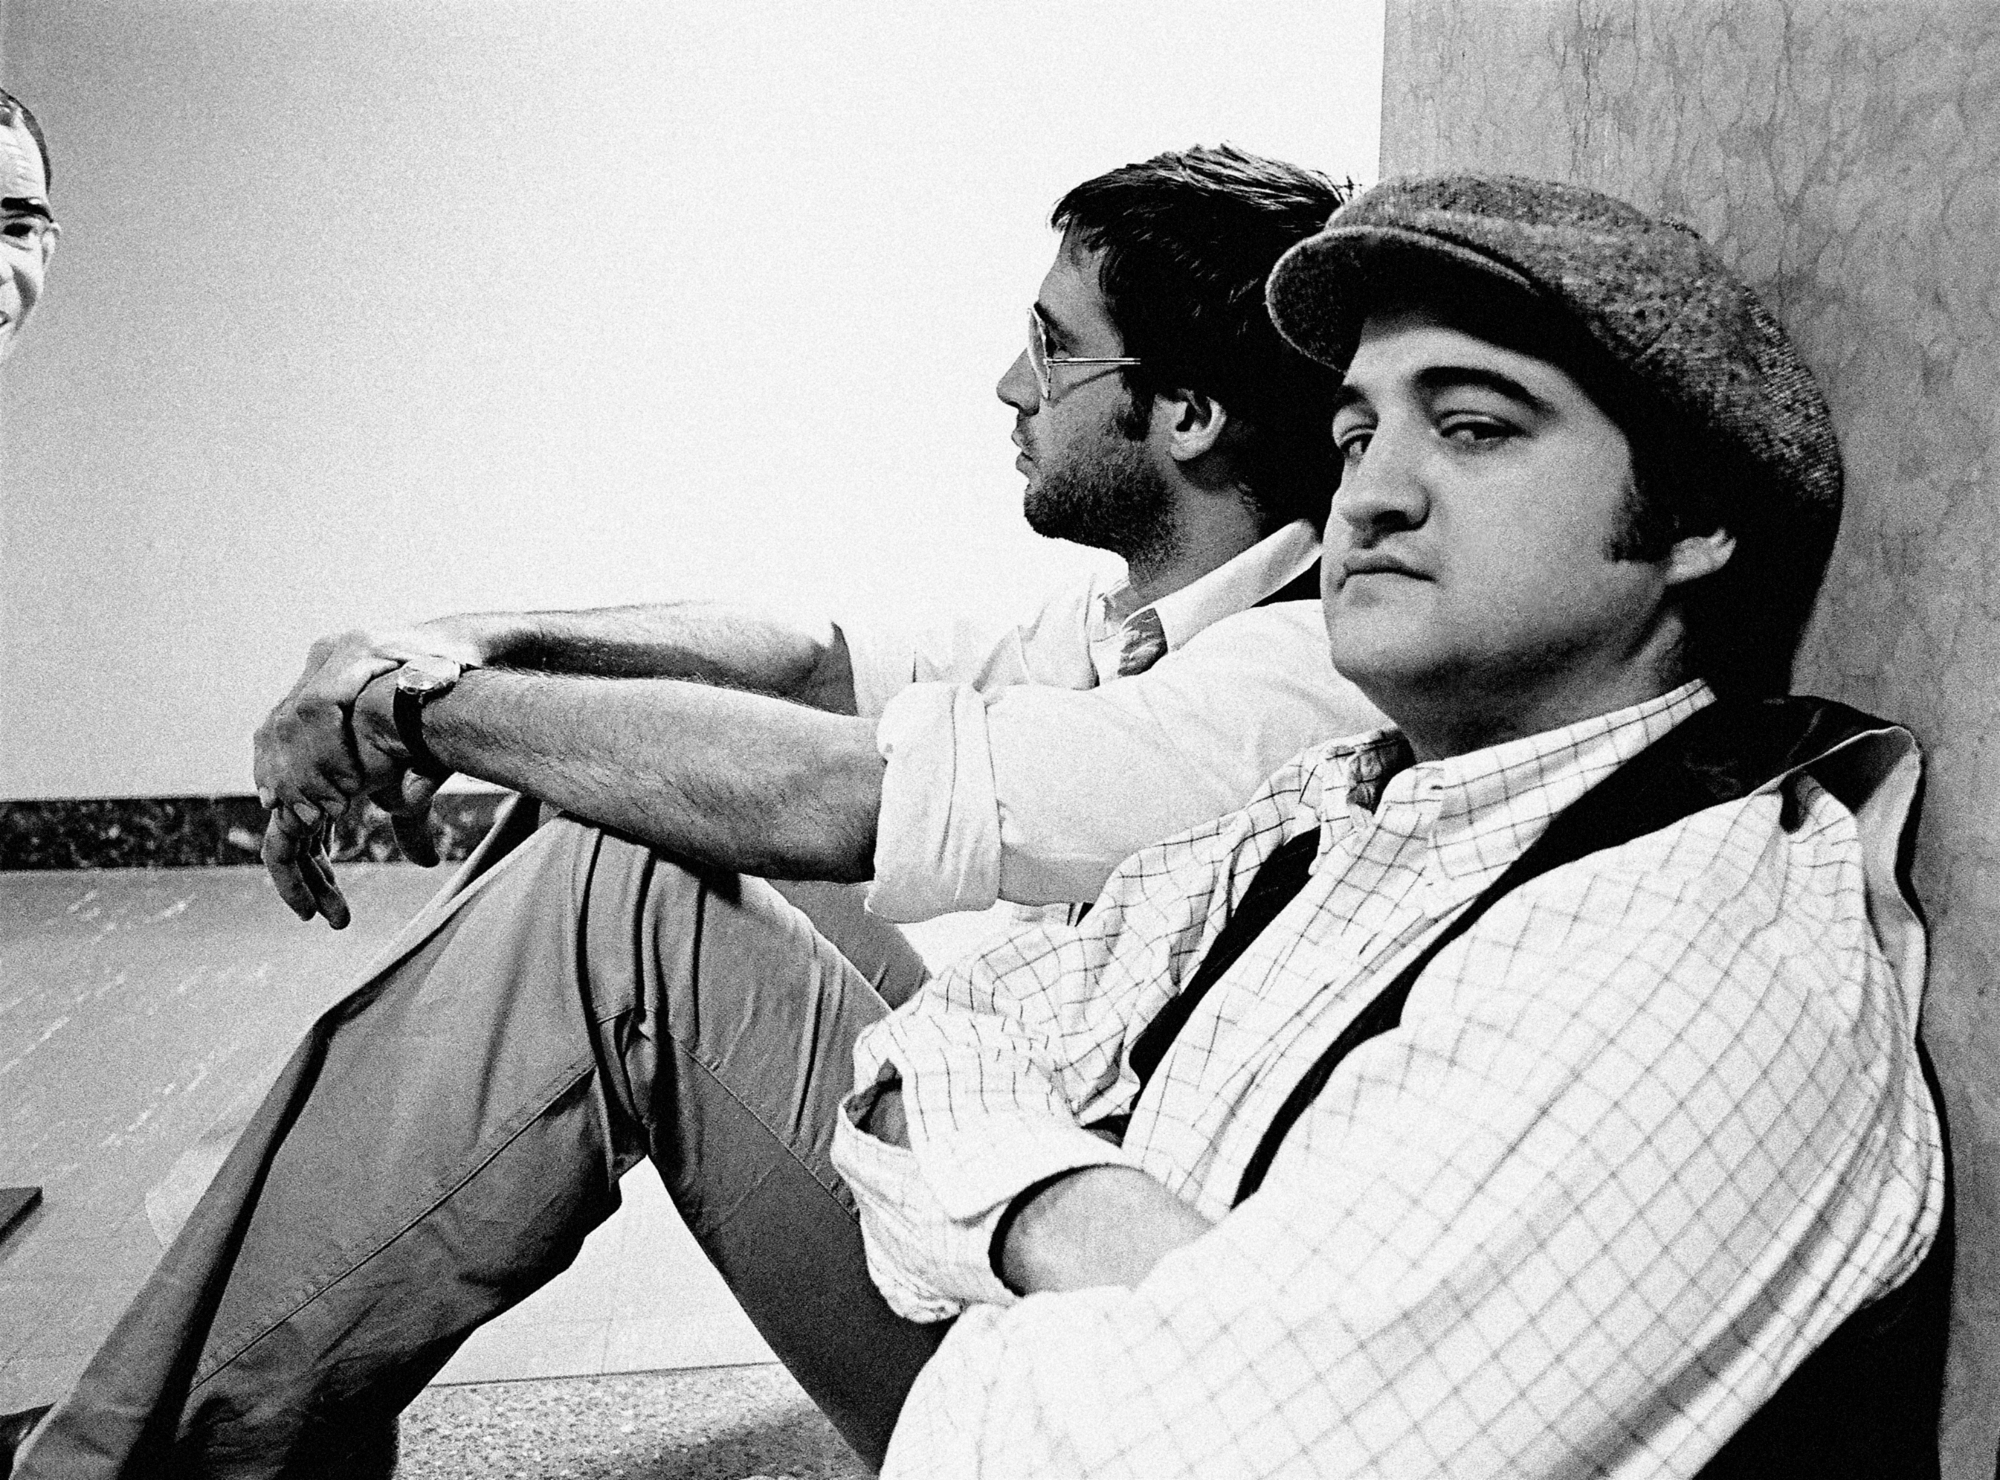 'Saturday Night Live' Chevy Chase and John Belushi sitting against a wall in a black-and-white picture. Chase is looking off and Belushi is looking toward the camera.